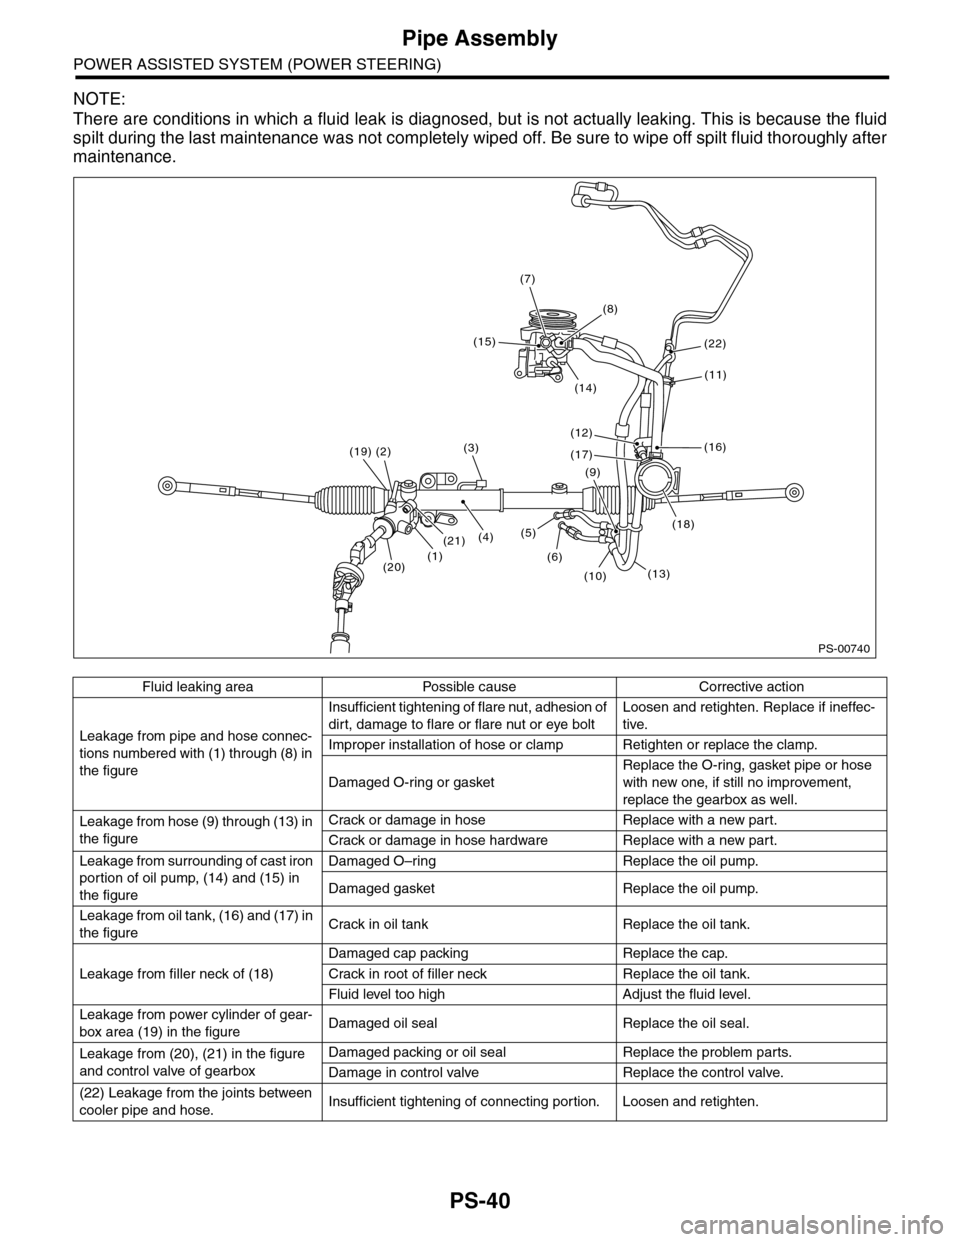 SUBARU TRIBECA 2009 1.G Service Workshop Manual PS-40
Pipe Assembly
POWER ASSISTED SYSTEM (POWER STEERING)
NOTE:
There are conditions in which a fluid leak is diagnosed, but is not actually leaking. This is because the fluid
spilt during the last m